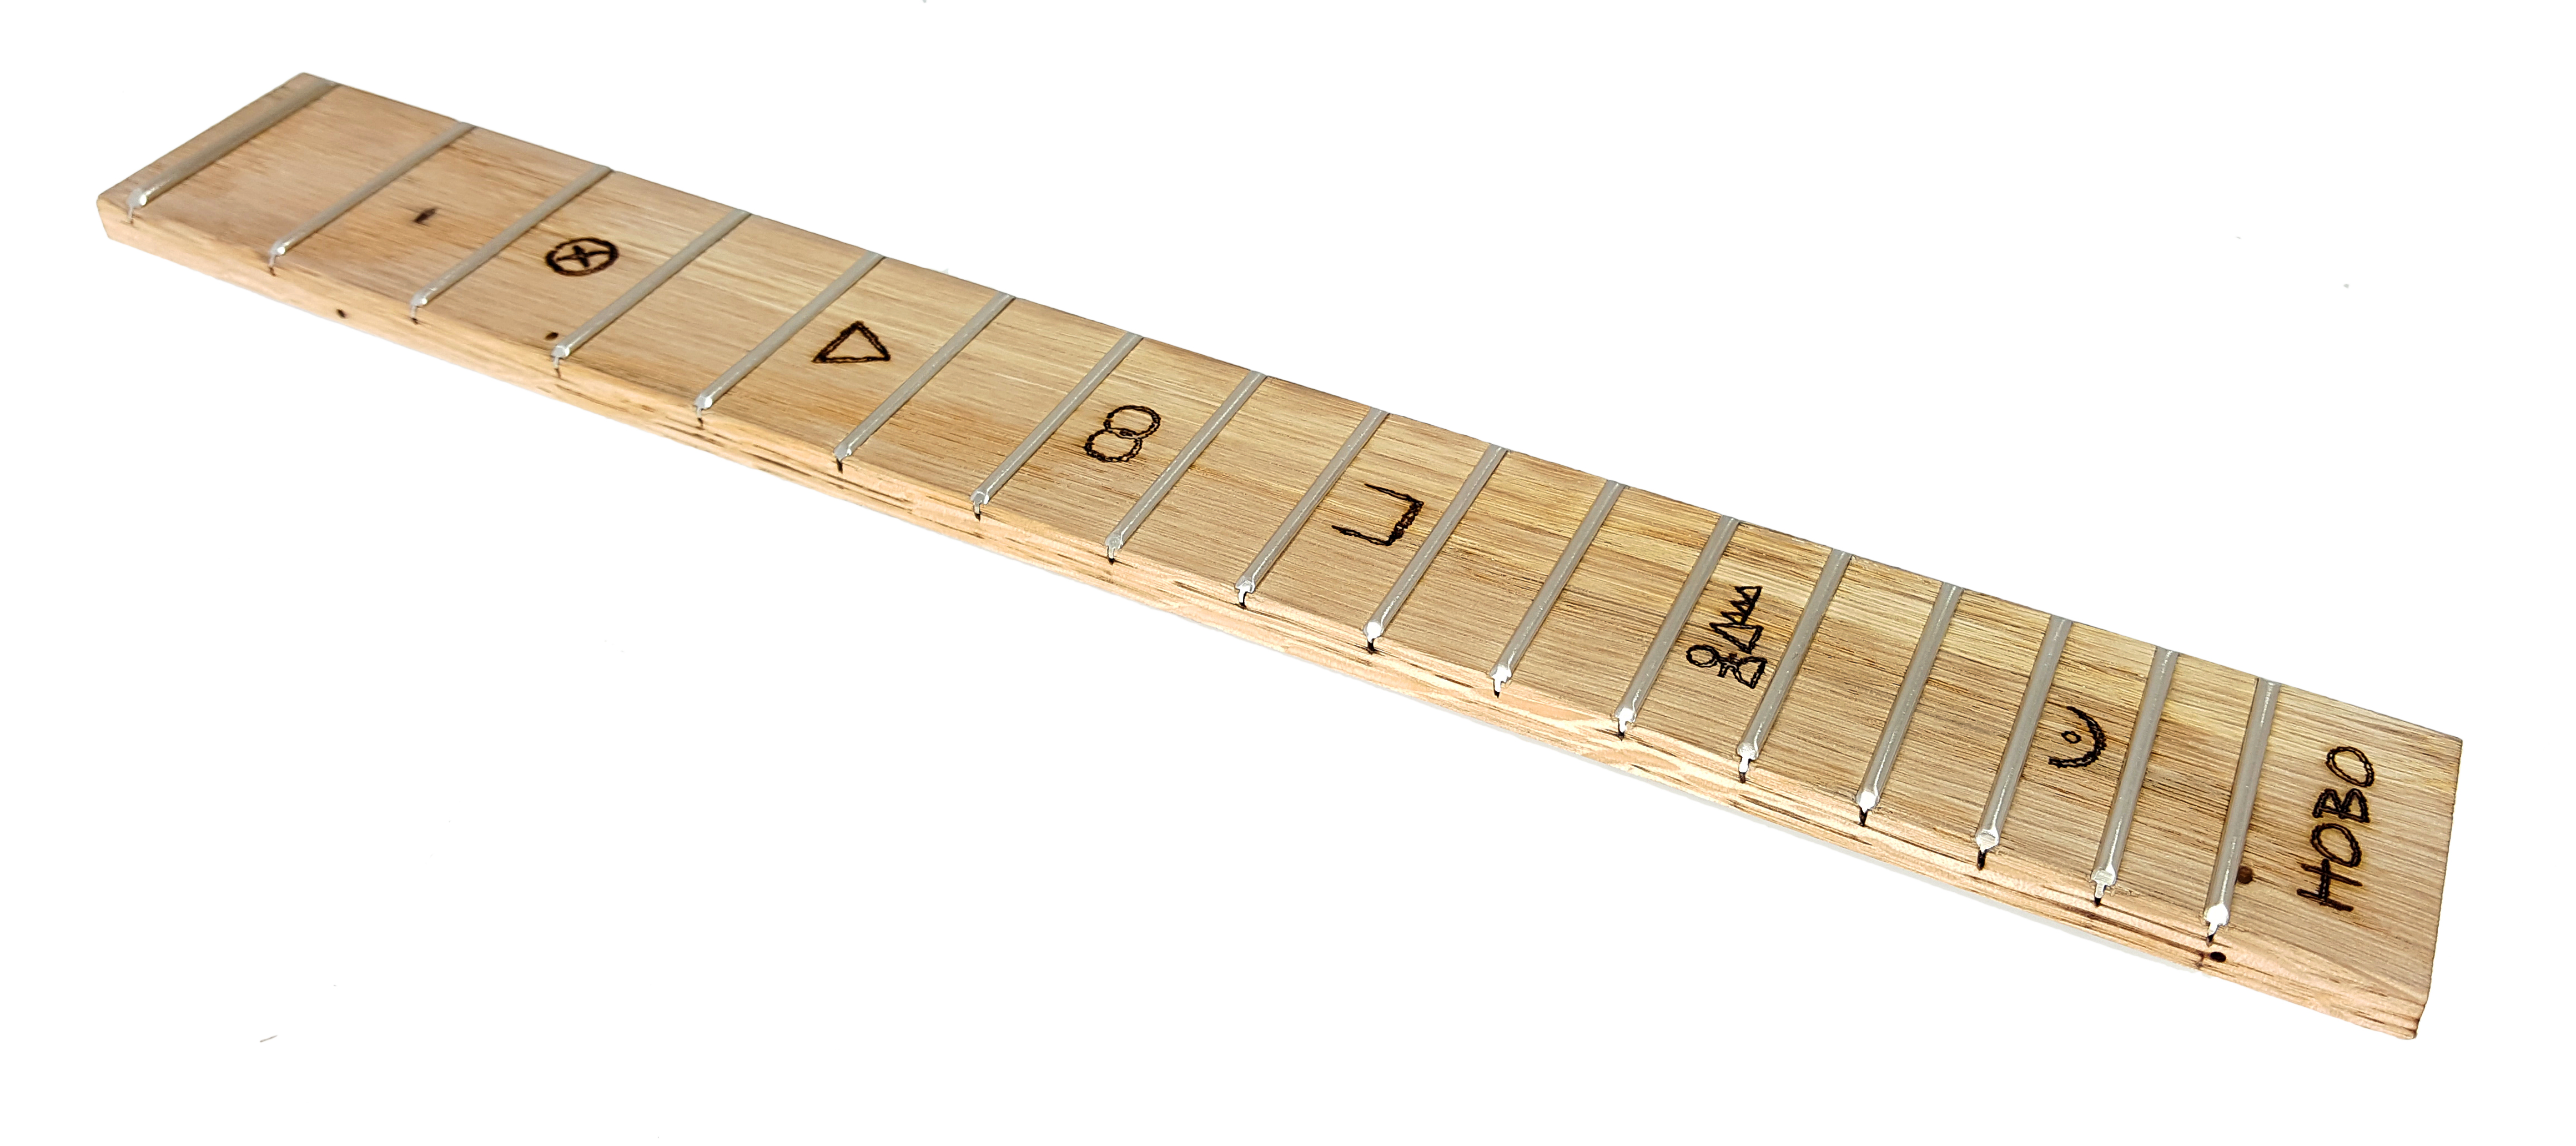 Hobo Fiddle Fretboard - Fully Fretted 17 -inch Scale - Custom-Engraved with Real Hobo Glyphs!